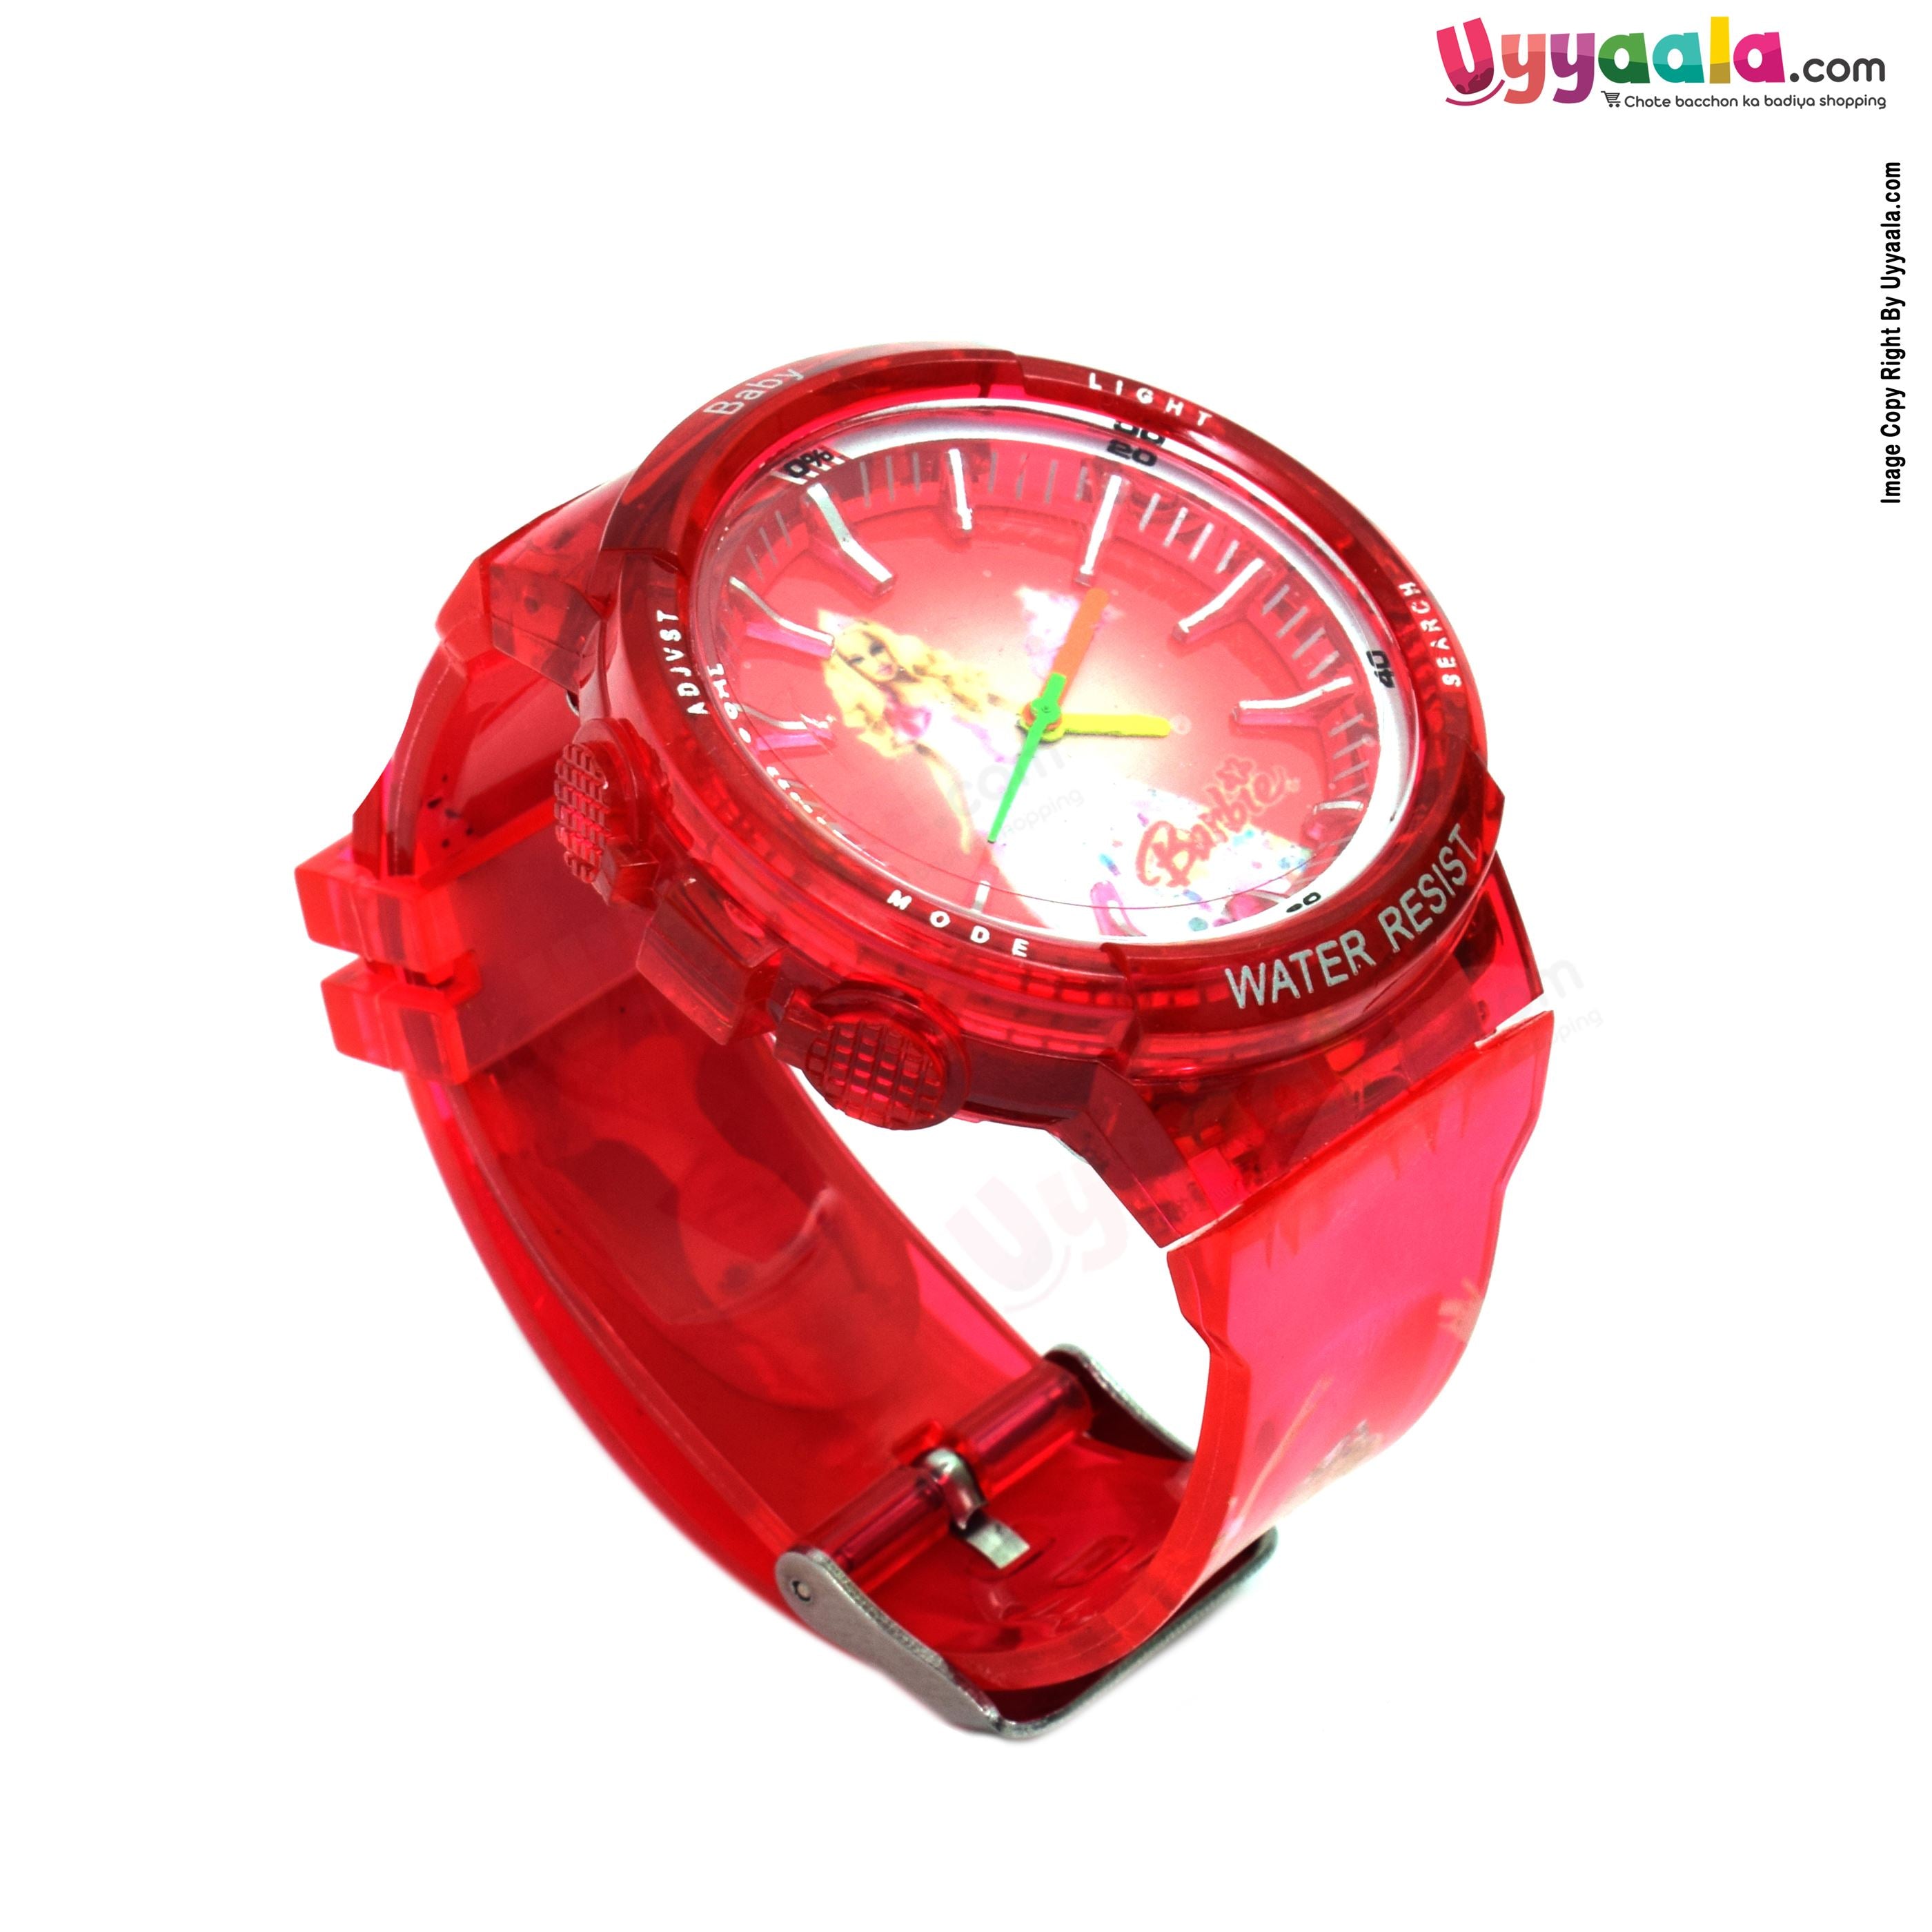 Barbie analog watch for kids - Red strap with barbie print